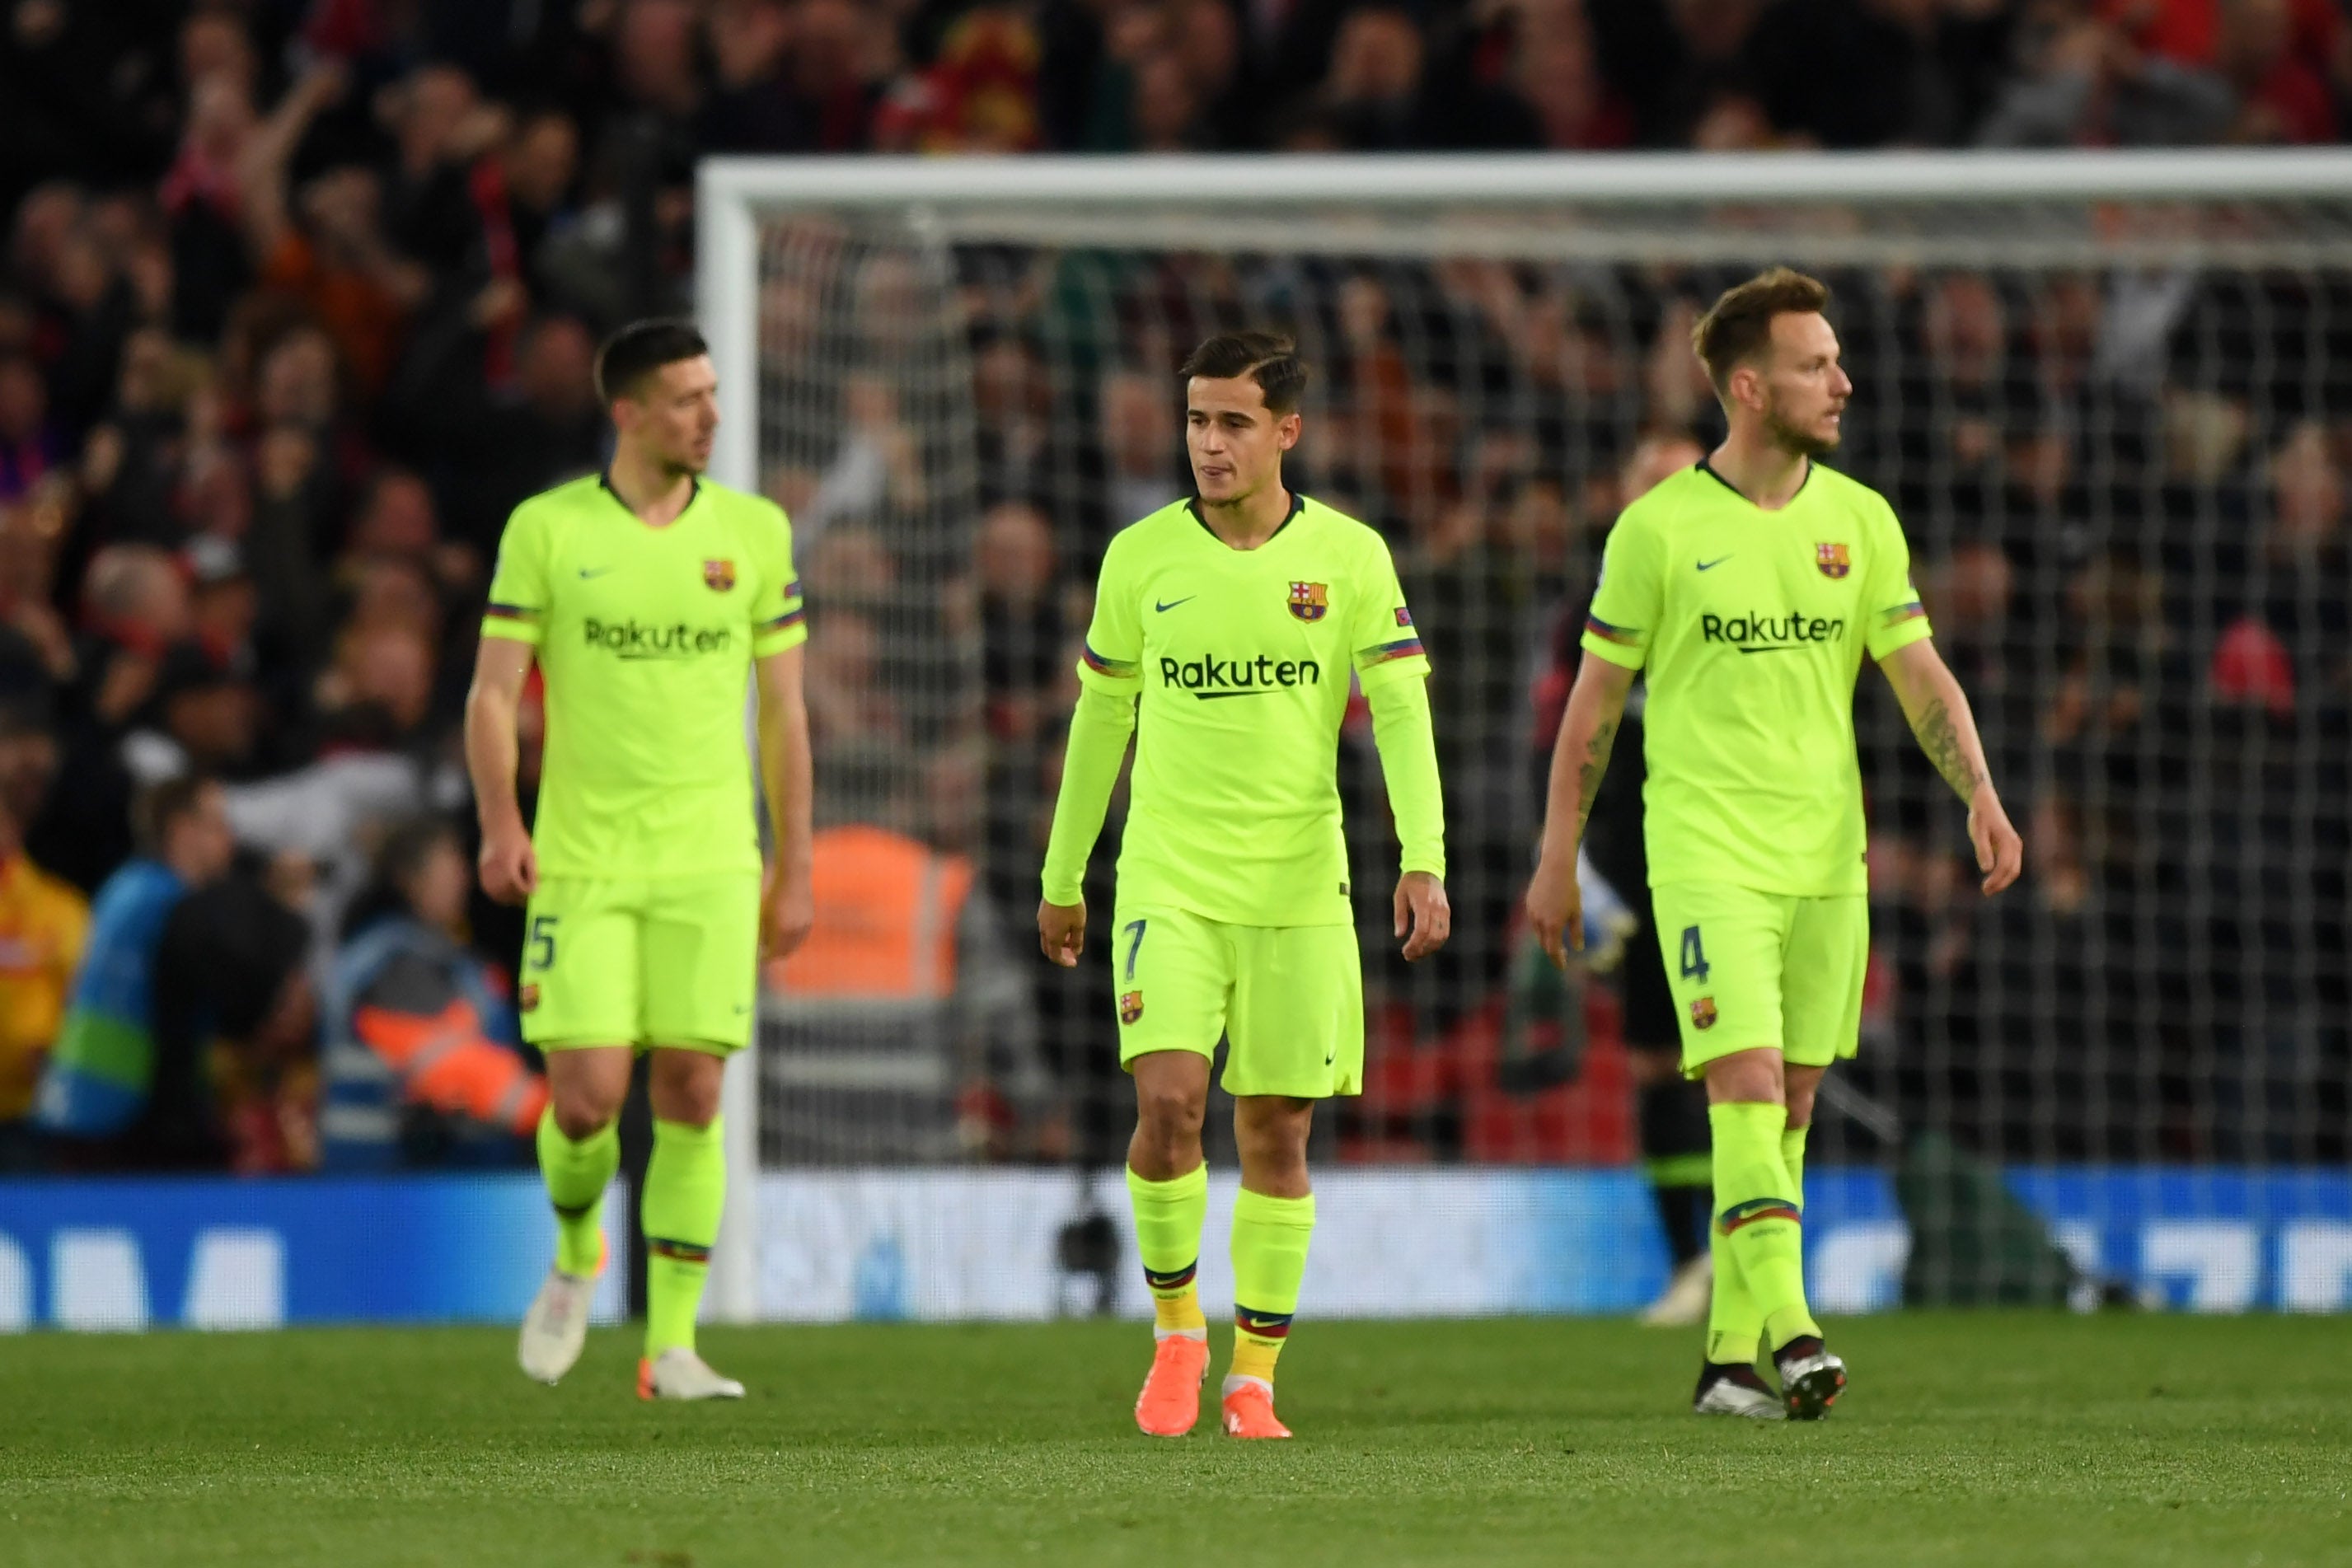 Philippe Coutinho’s return to Anfield with Barcelona in 2019 in what was one of the most famous wins in Liverpool history